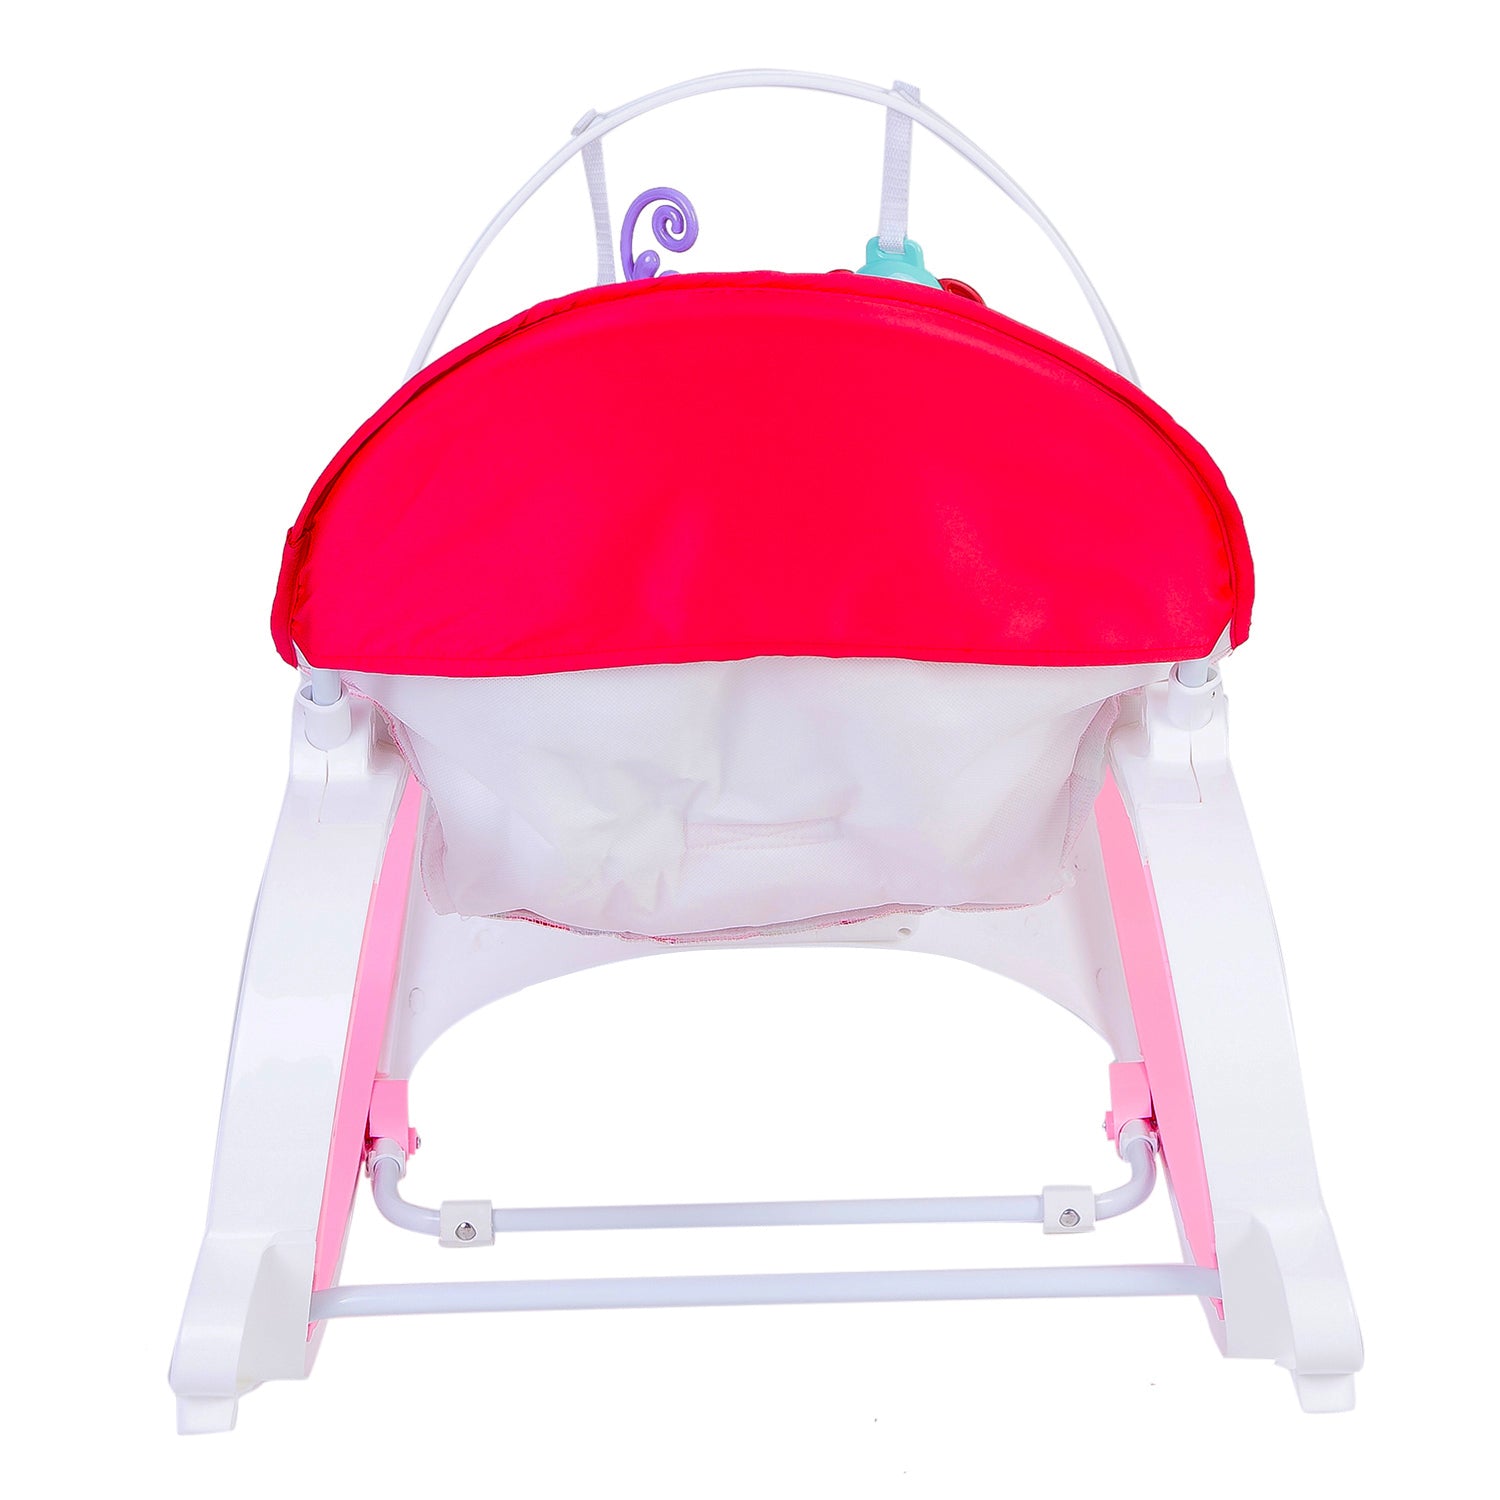 Infant To Toddler Polka Dotted Portable Rocker With Hanging Toys Red & Pink - Baby Moo